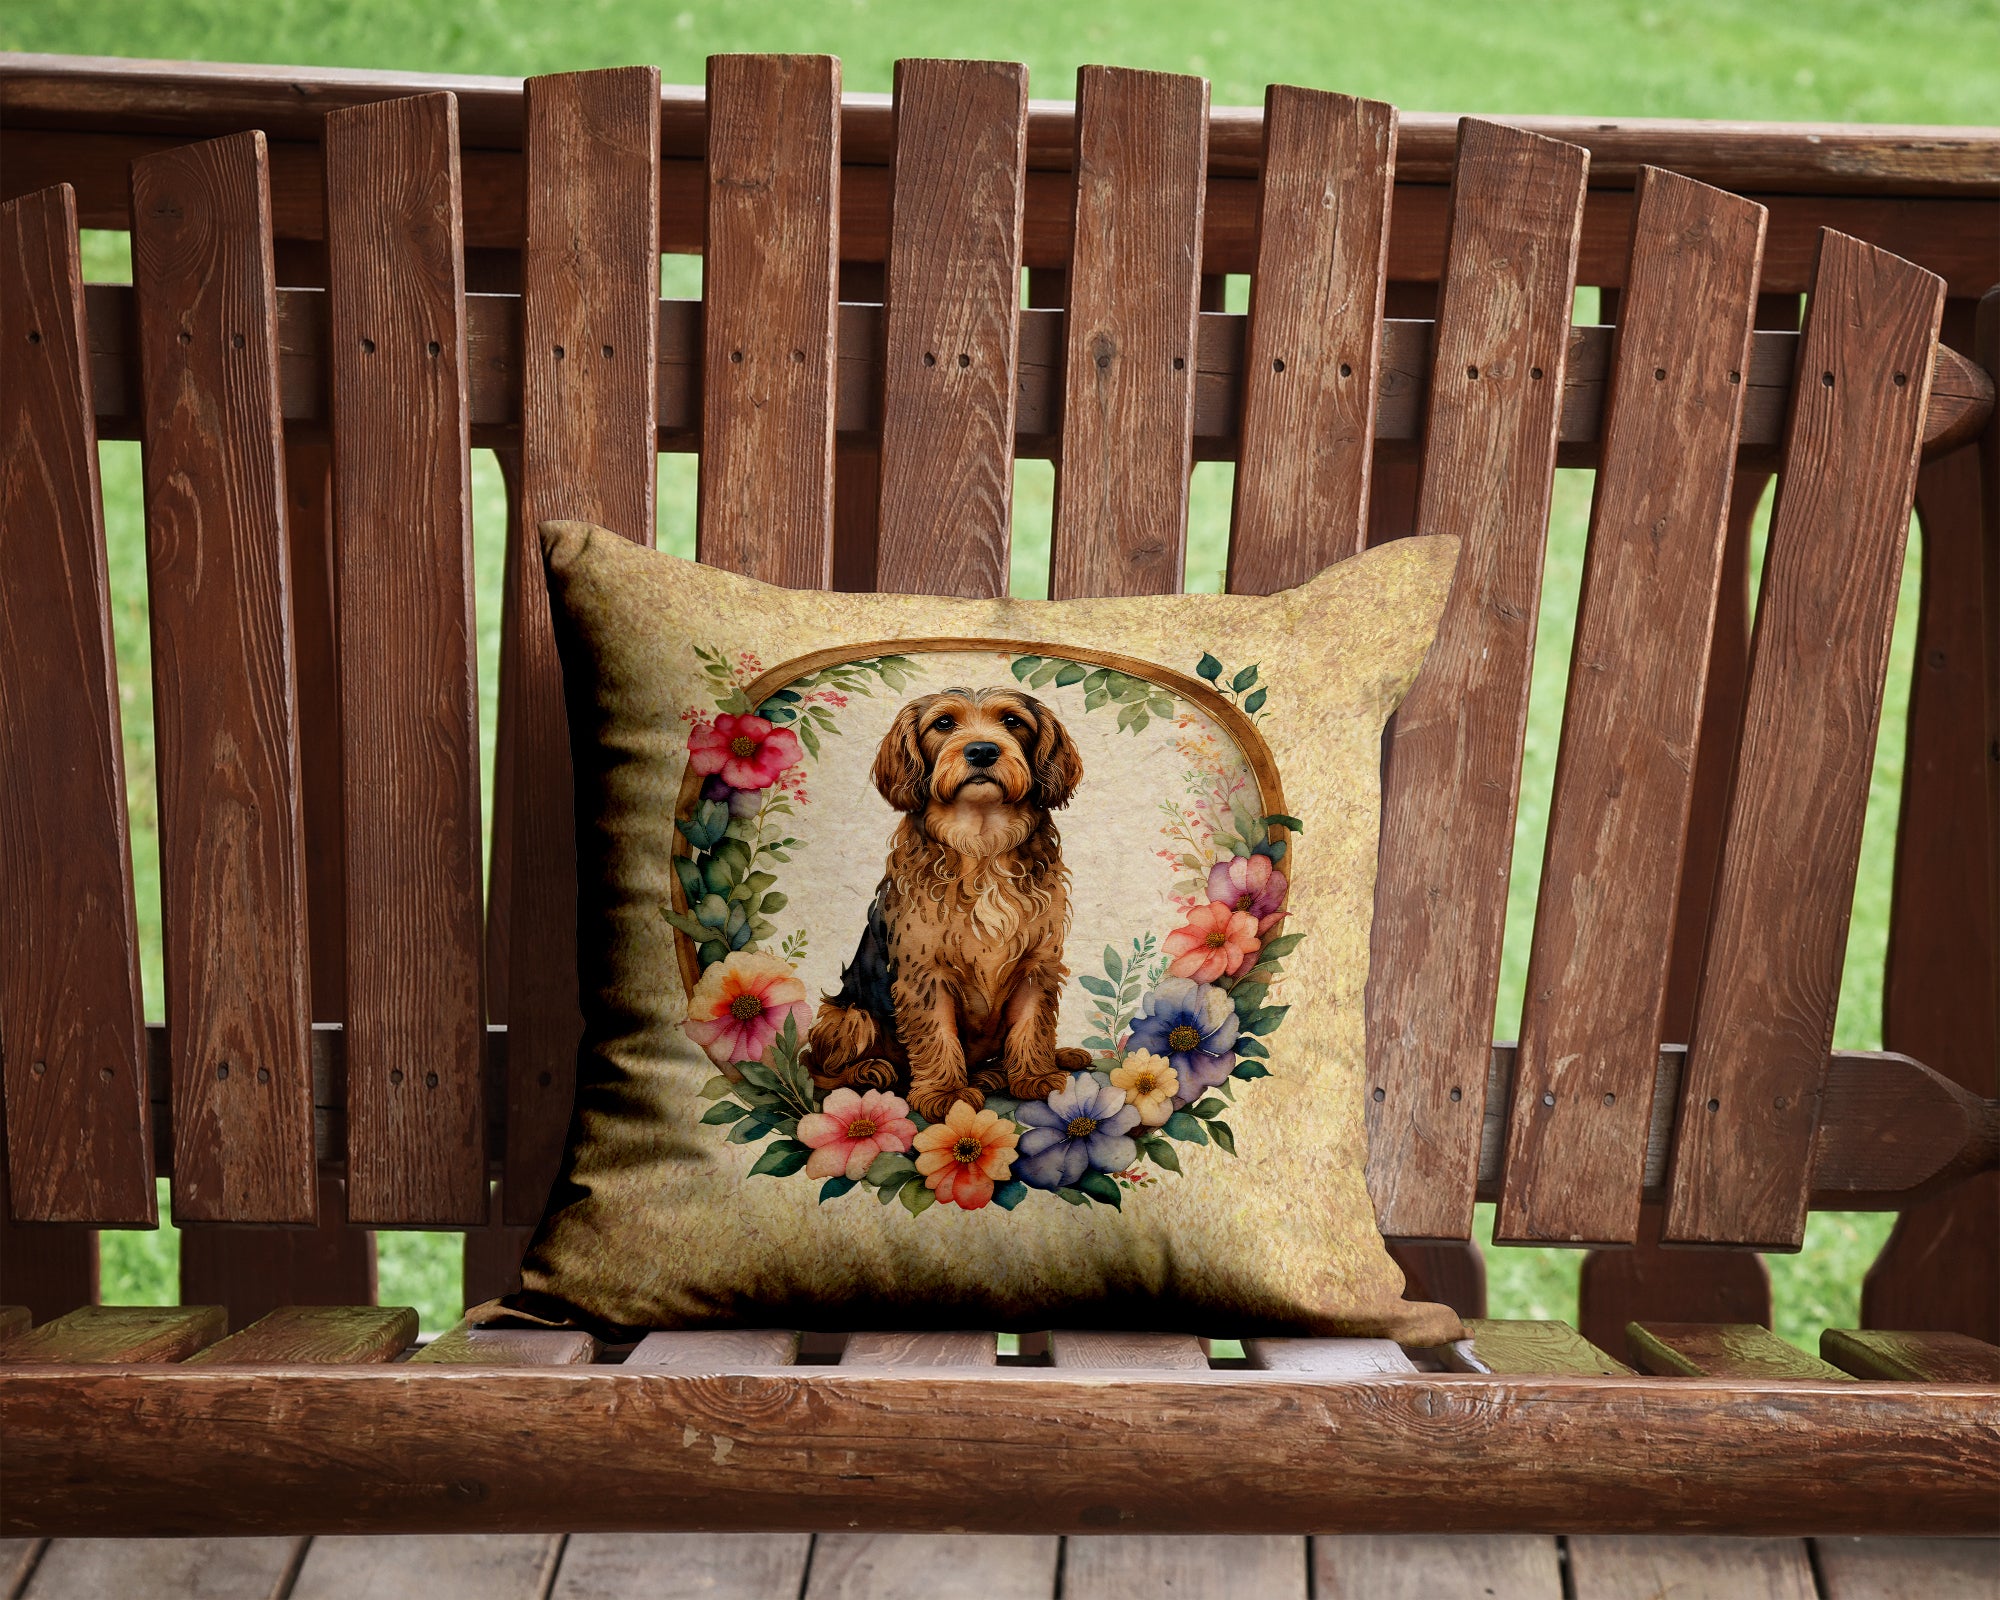 Buy this Otterhound and Flowers Fabric Decorative Pillow